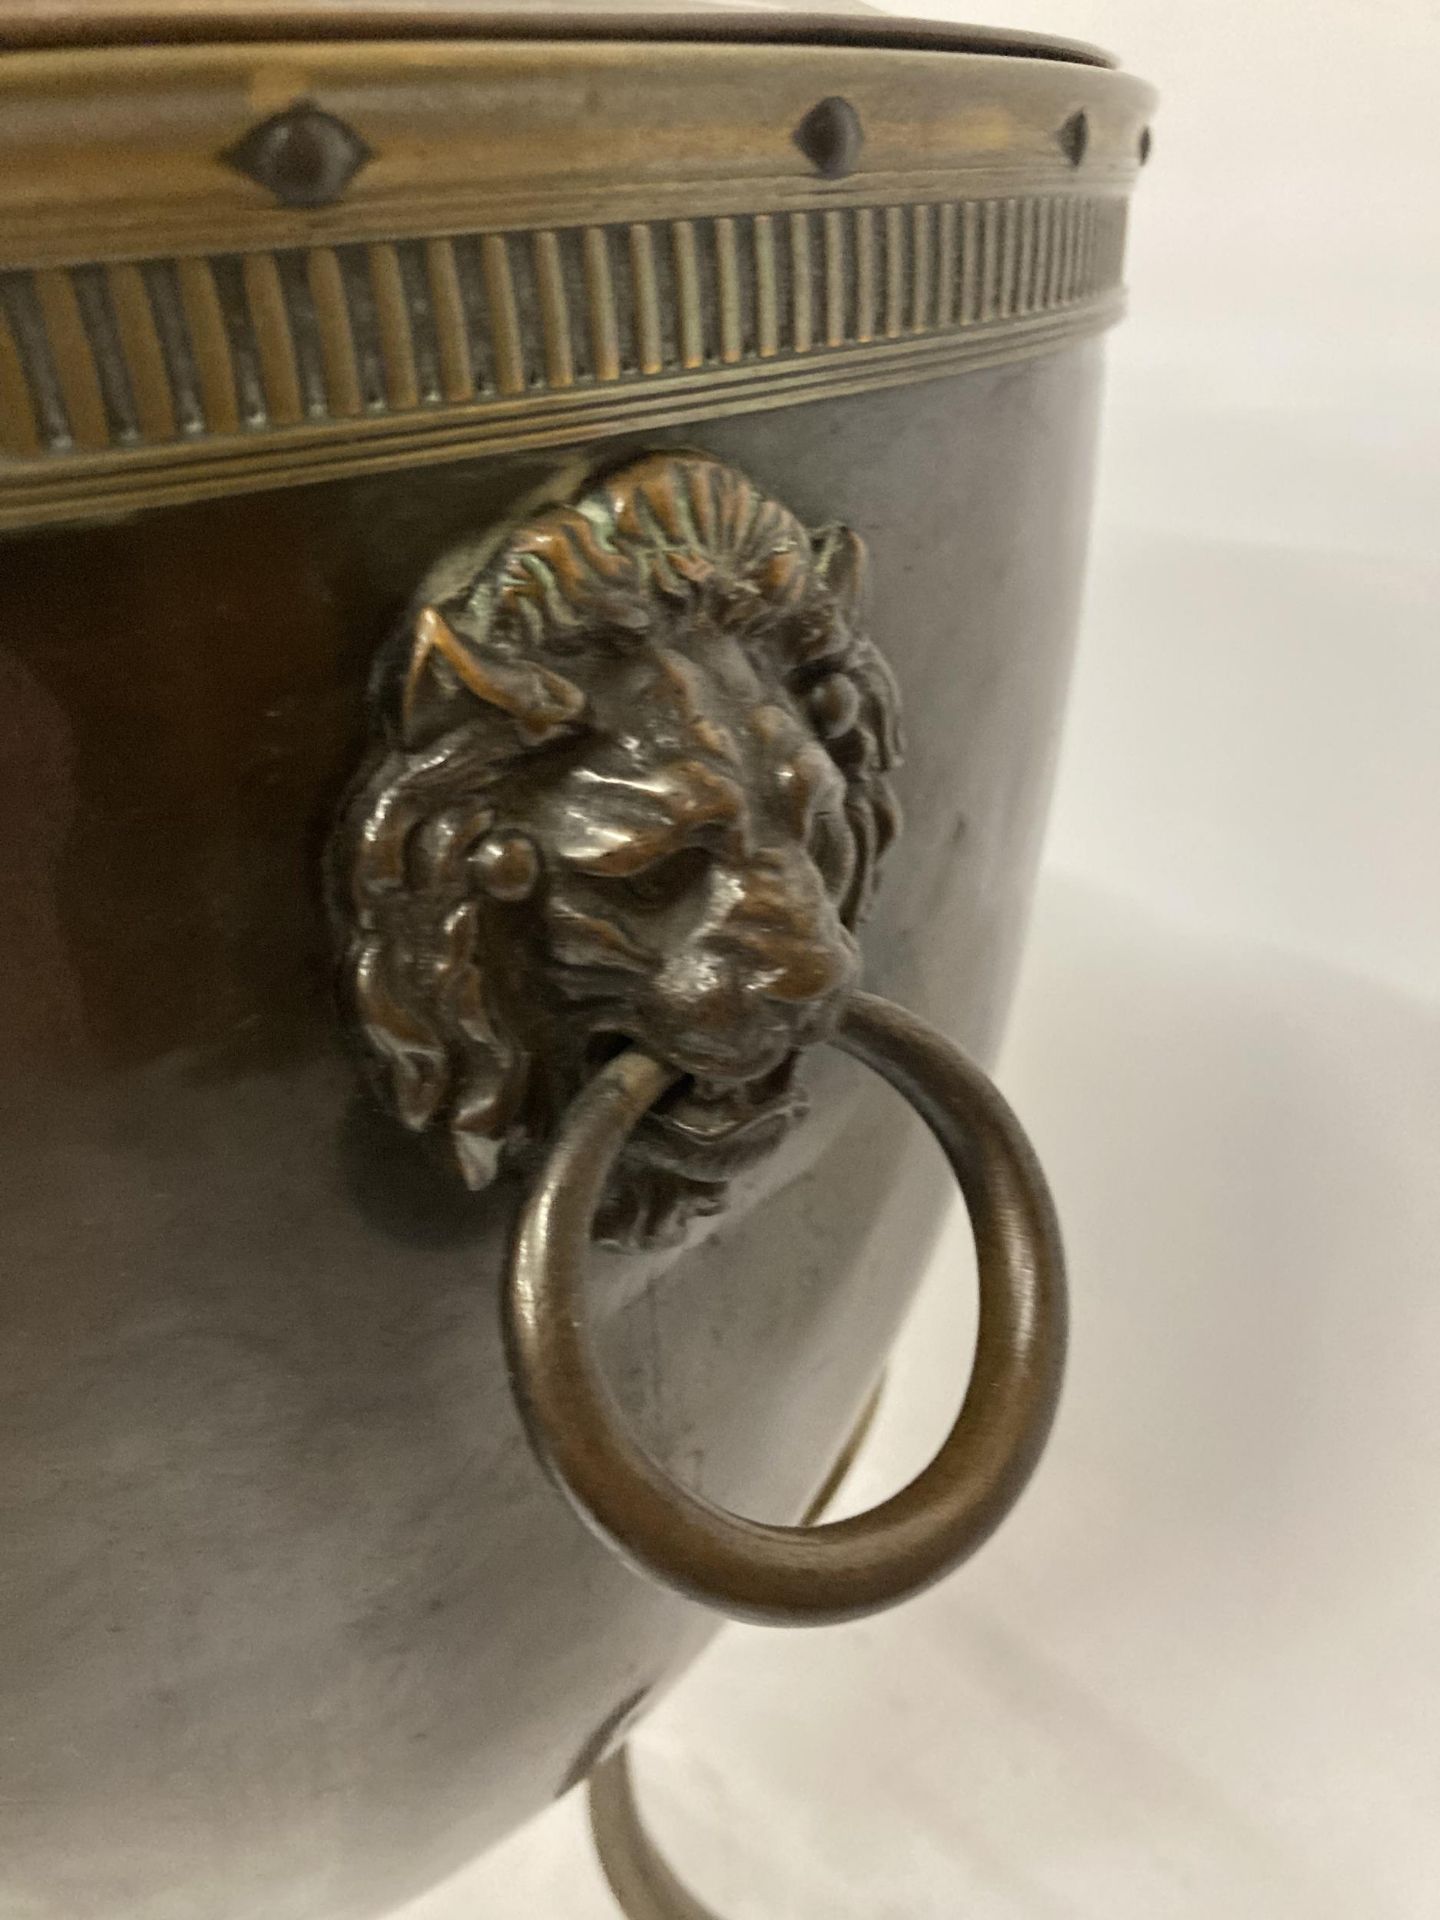 A BRASS AND COPPER COAL BOX ON FOUR LEGS, WITH LION HEAD HANDLES, AN ACORN TOP AND LINER - Image 2 of 5